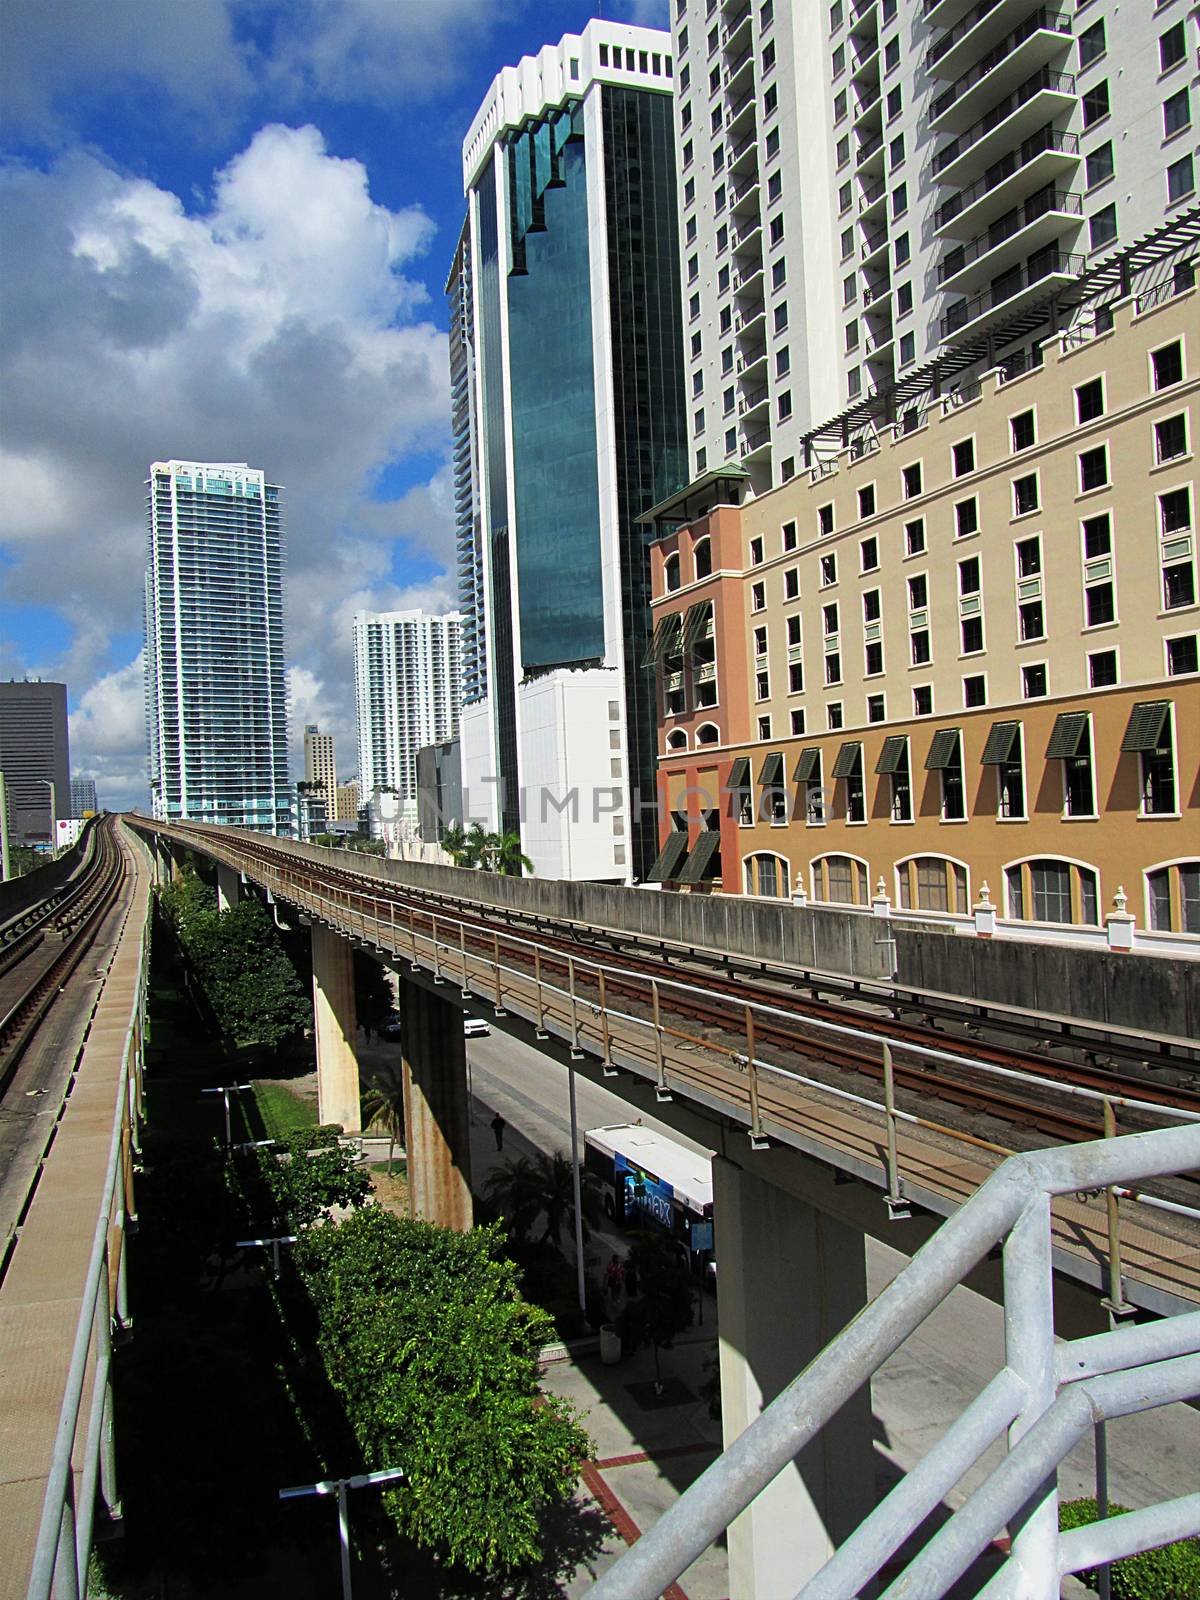 A panoramic illustration of Miami downtown